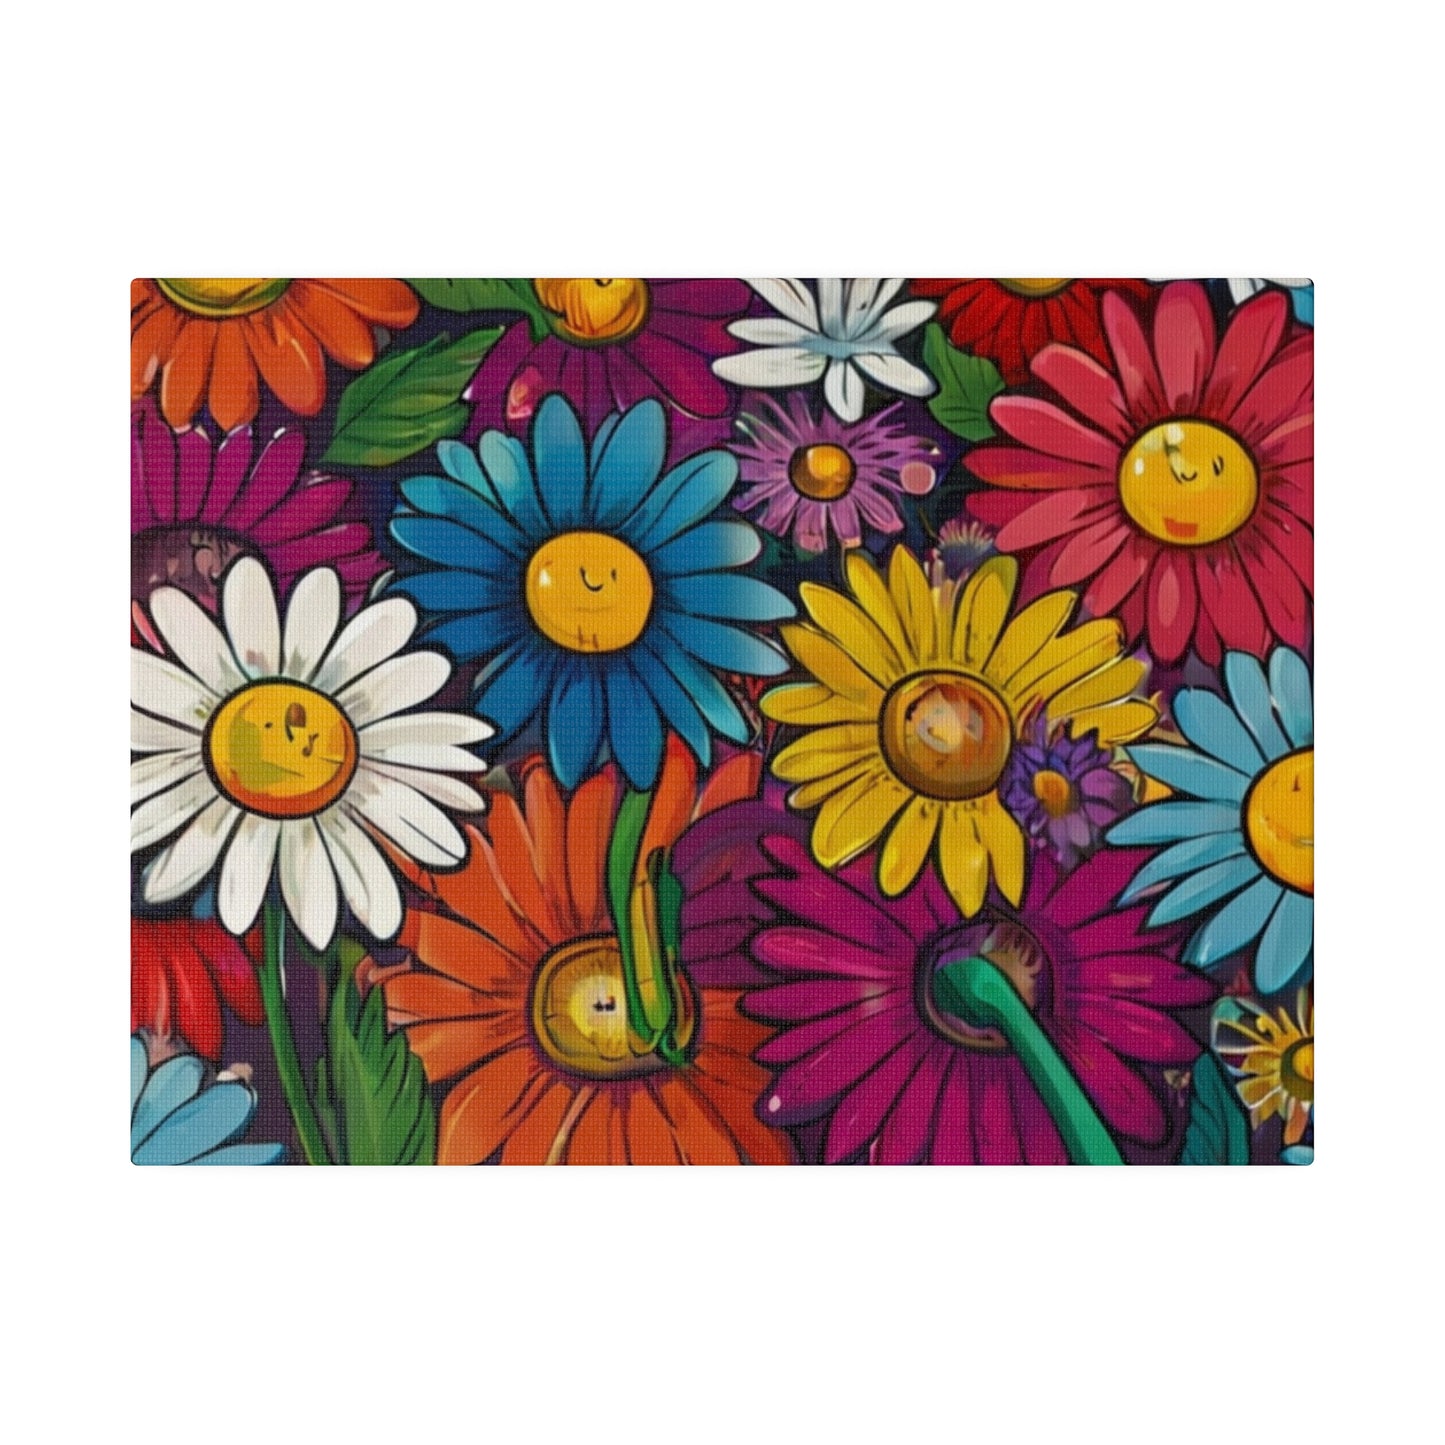 Multicoloured Daisies Canvas - Matte Canvas, Stretched, 0.75"